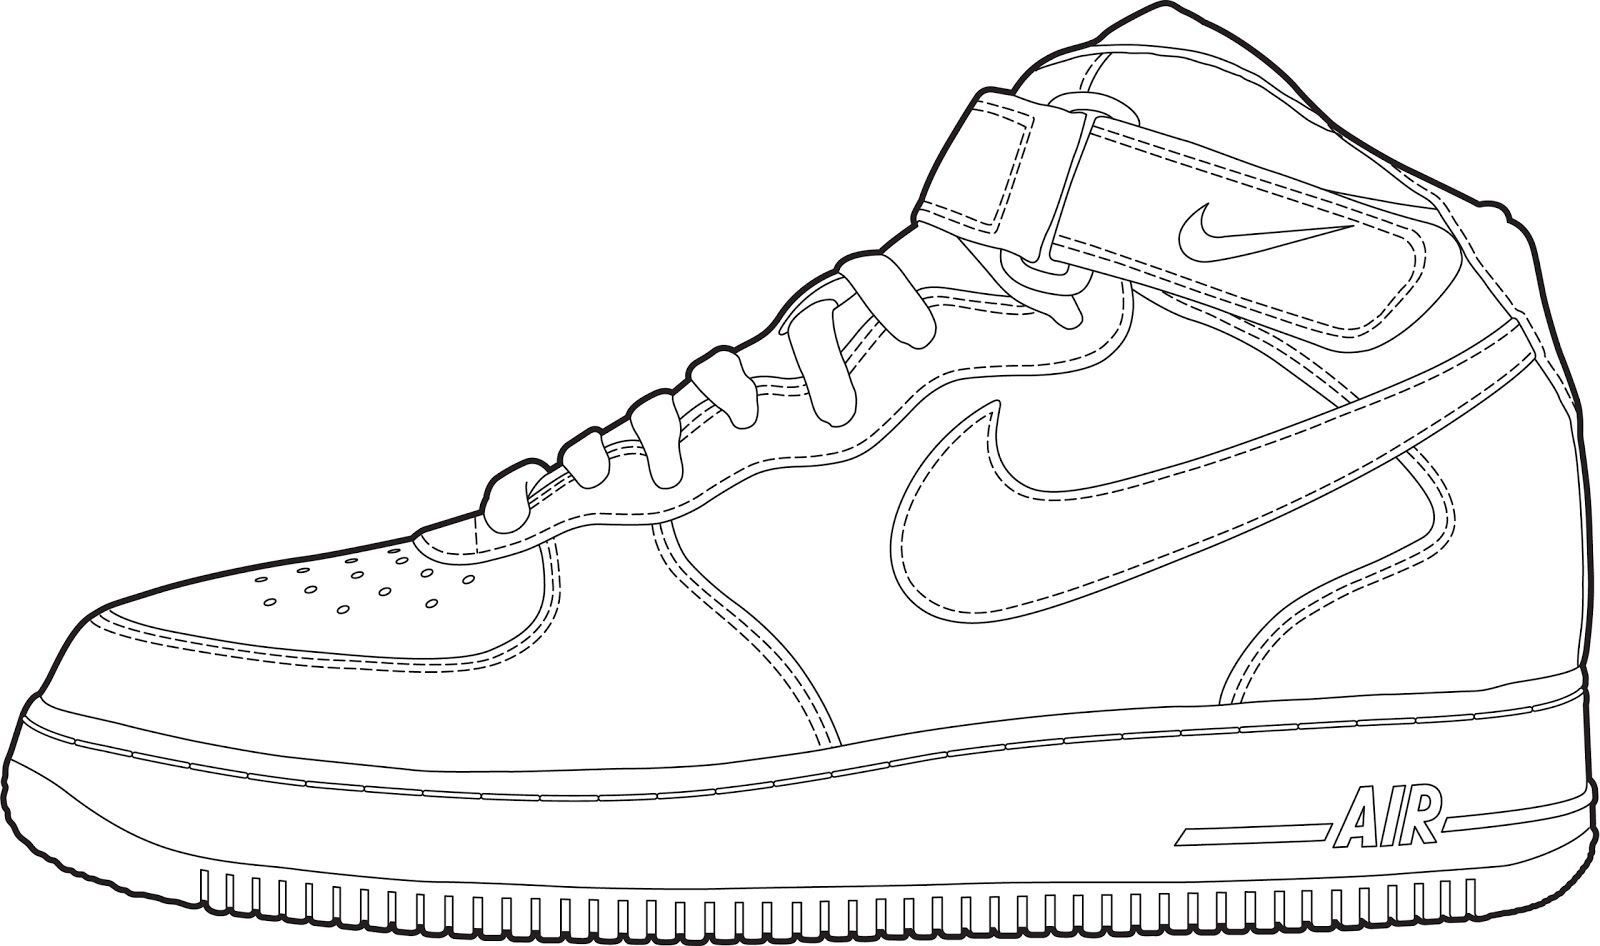 Astronaut Air Force 1 Nike Shoe - Pics about space